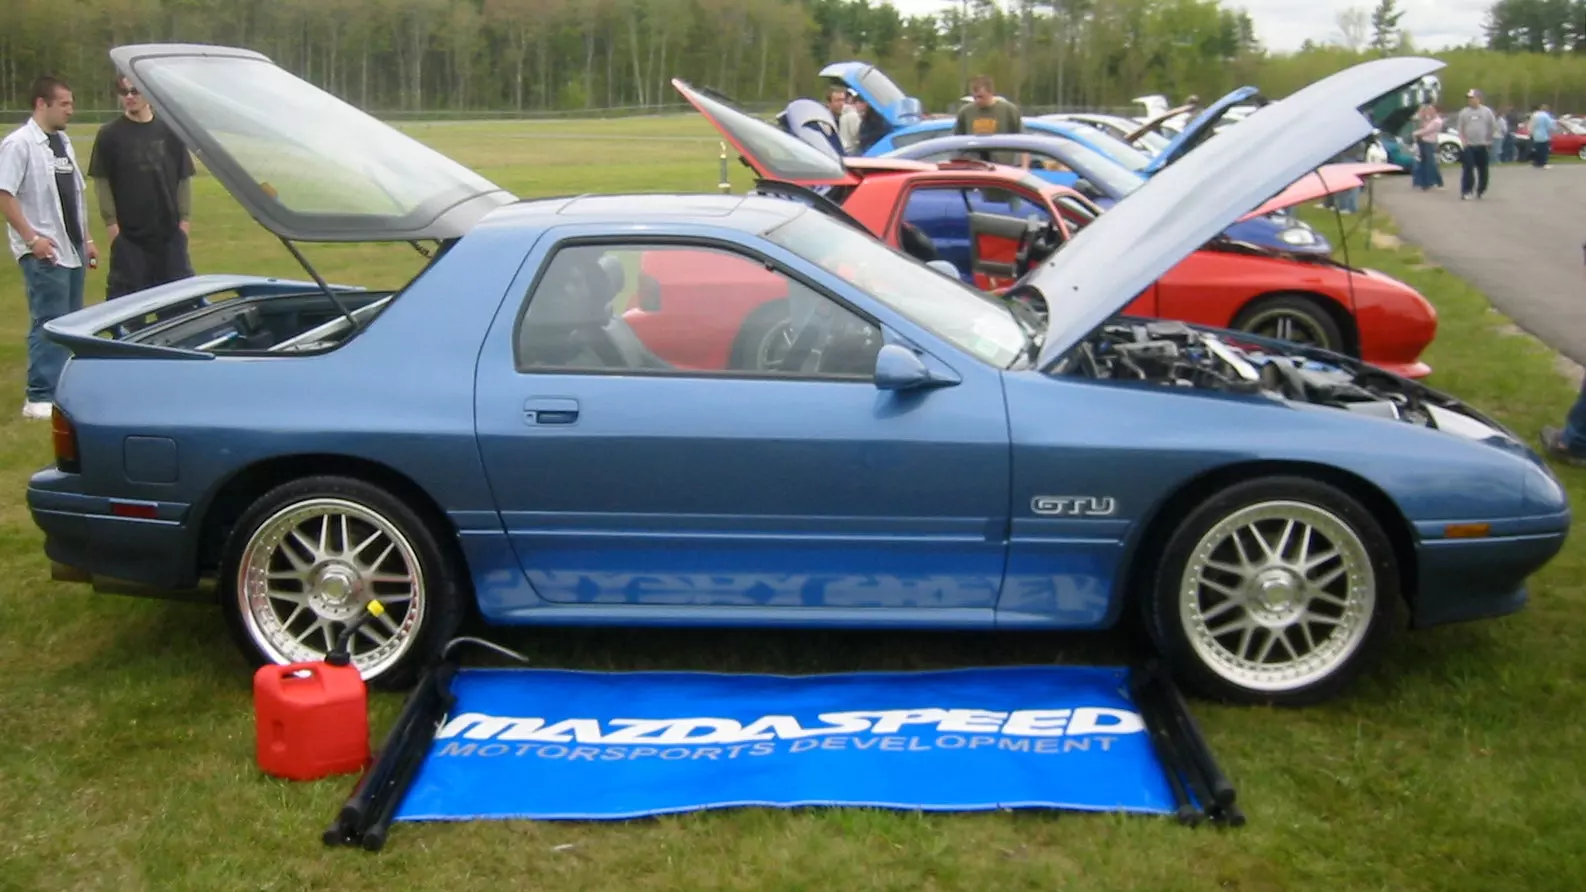 I Sure Was Proud of My Car Show Display in 2005 | Autance